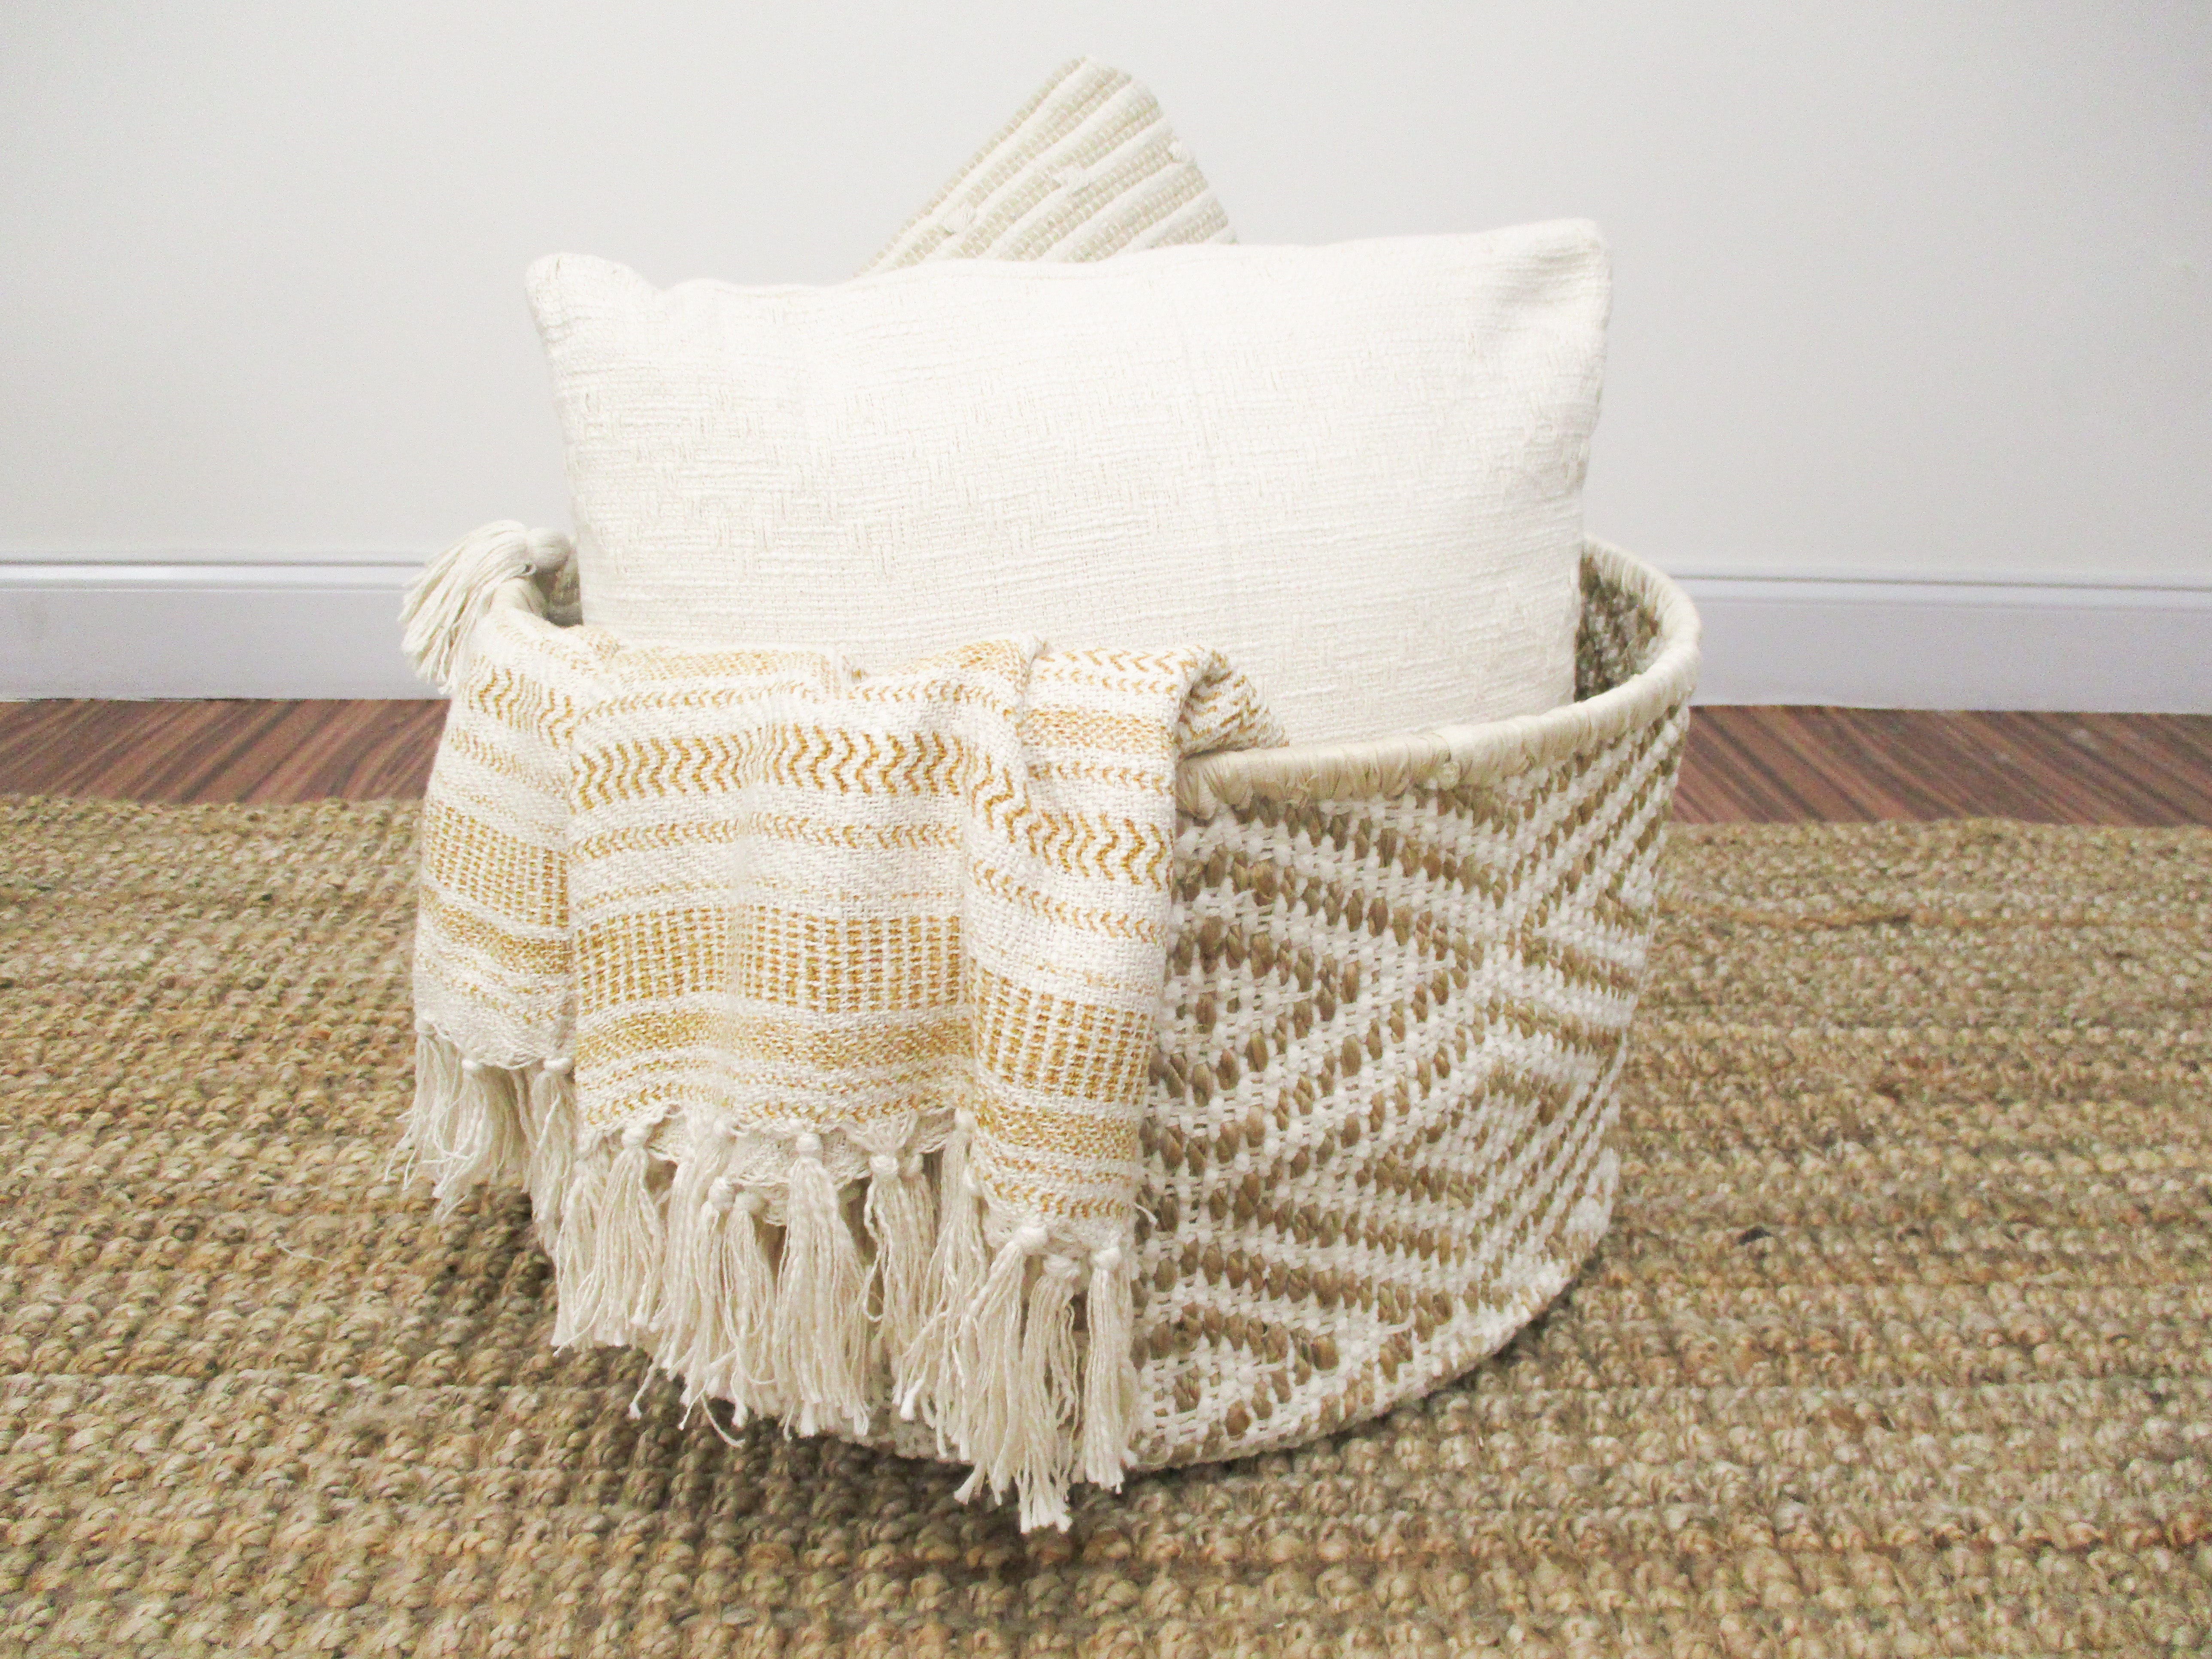 3 in 1 Basket, Stool, and Pouf